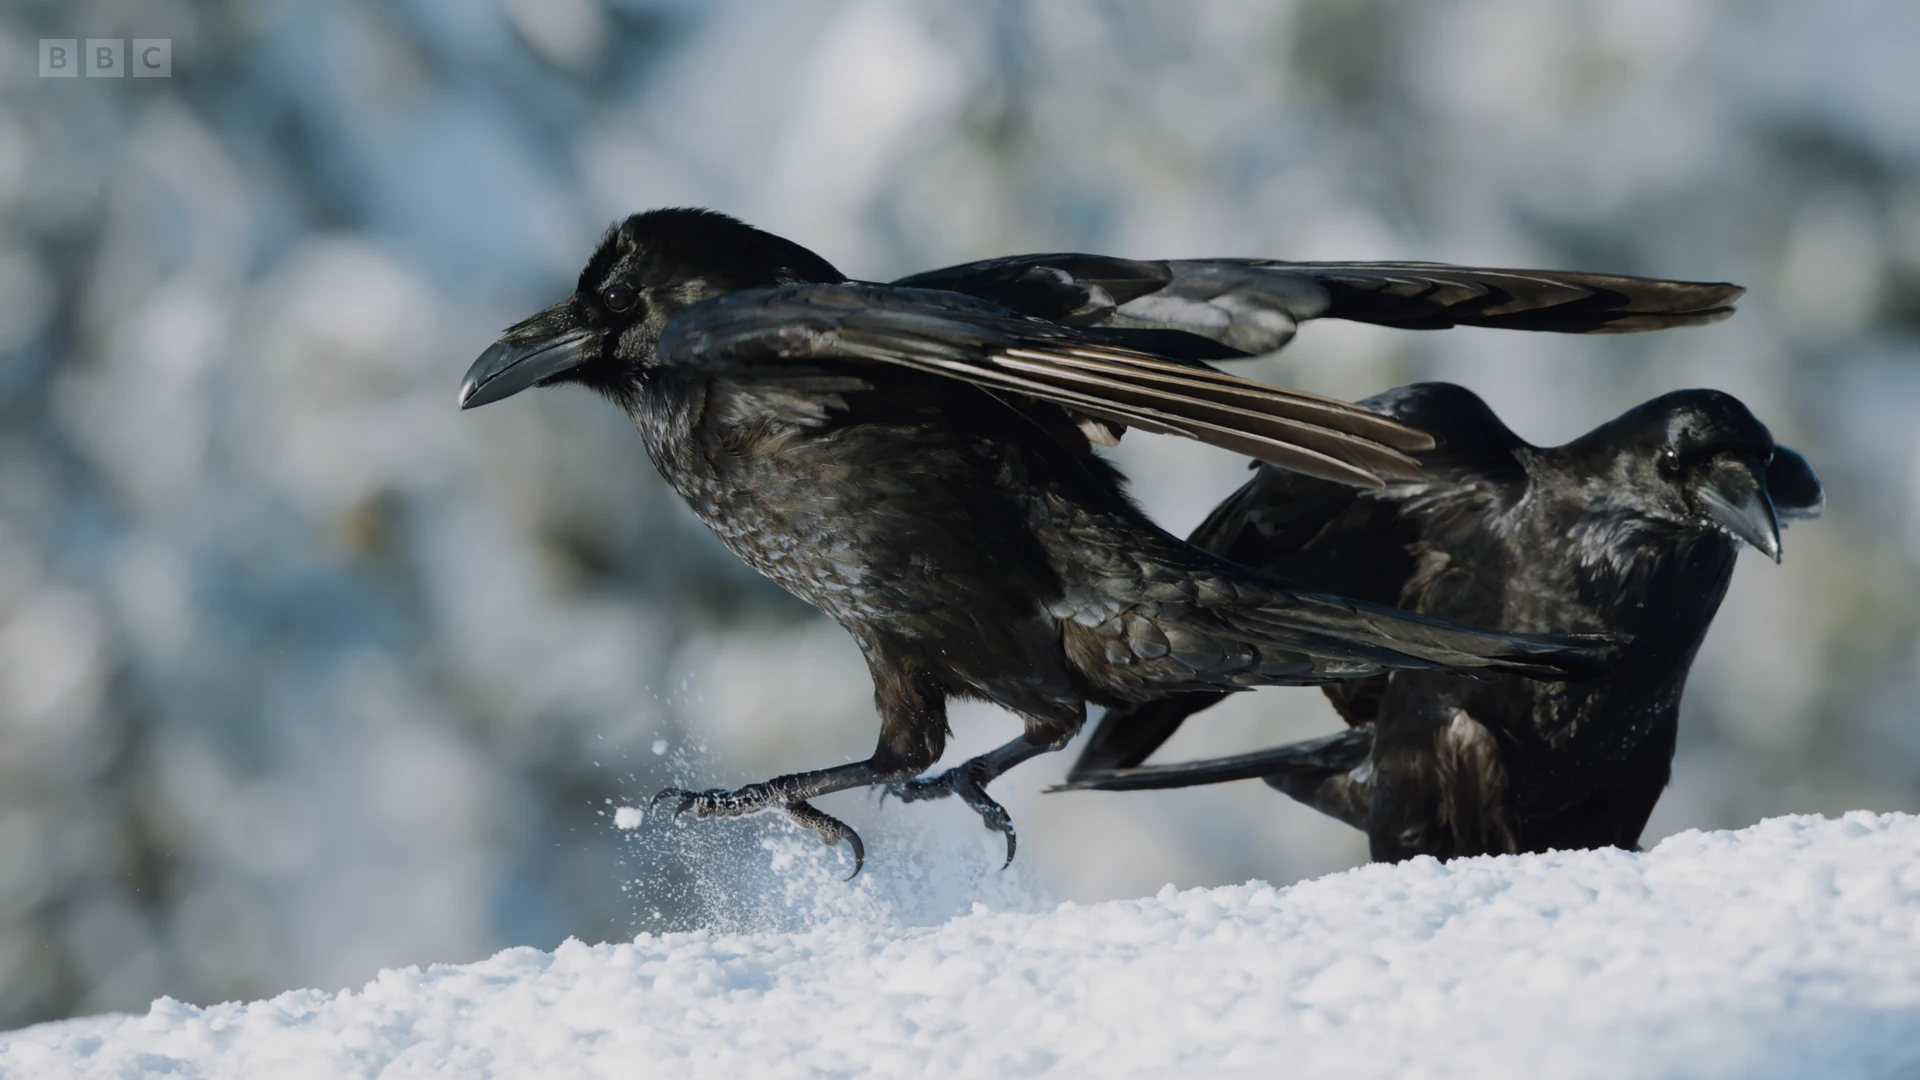 Carrion crow (Corvus corone corone) as shown in Planet Earth II - Mountains